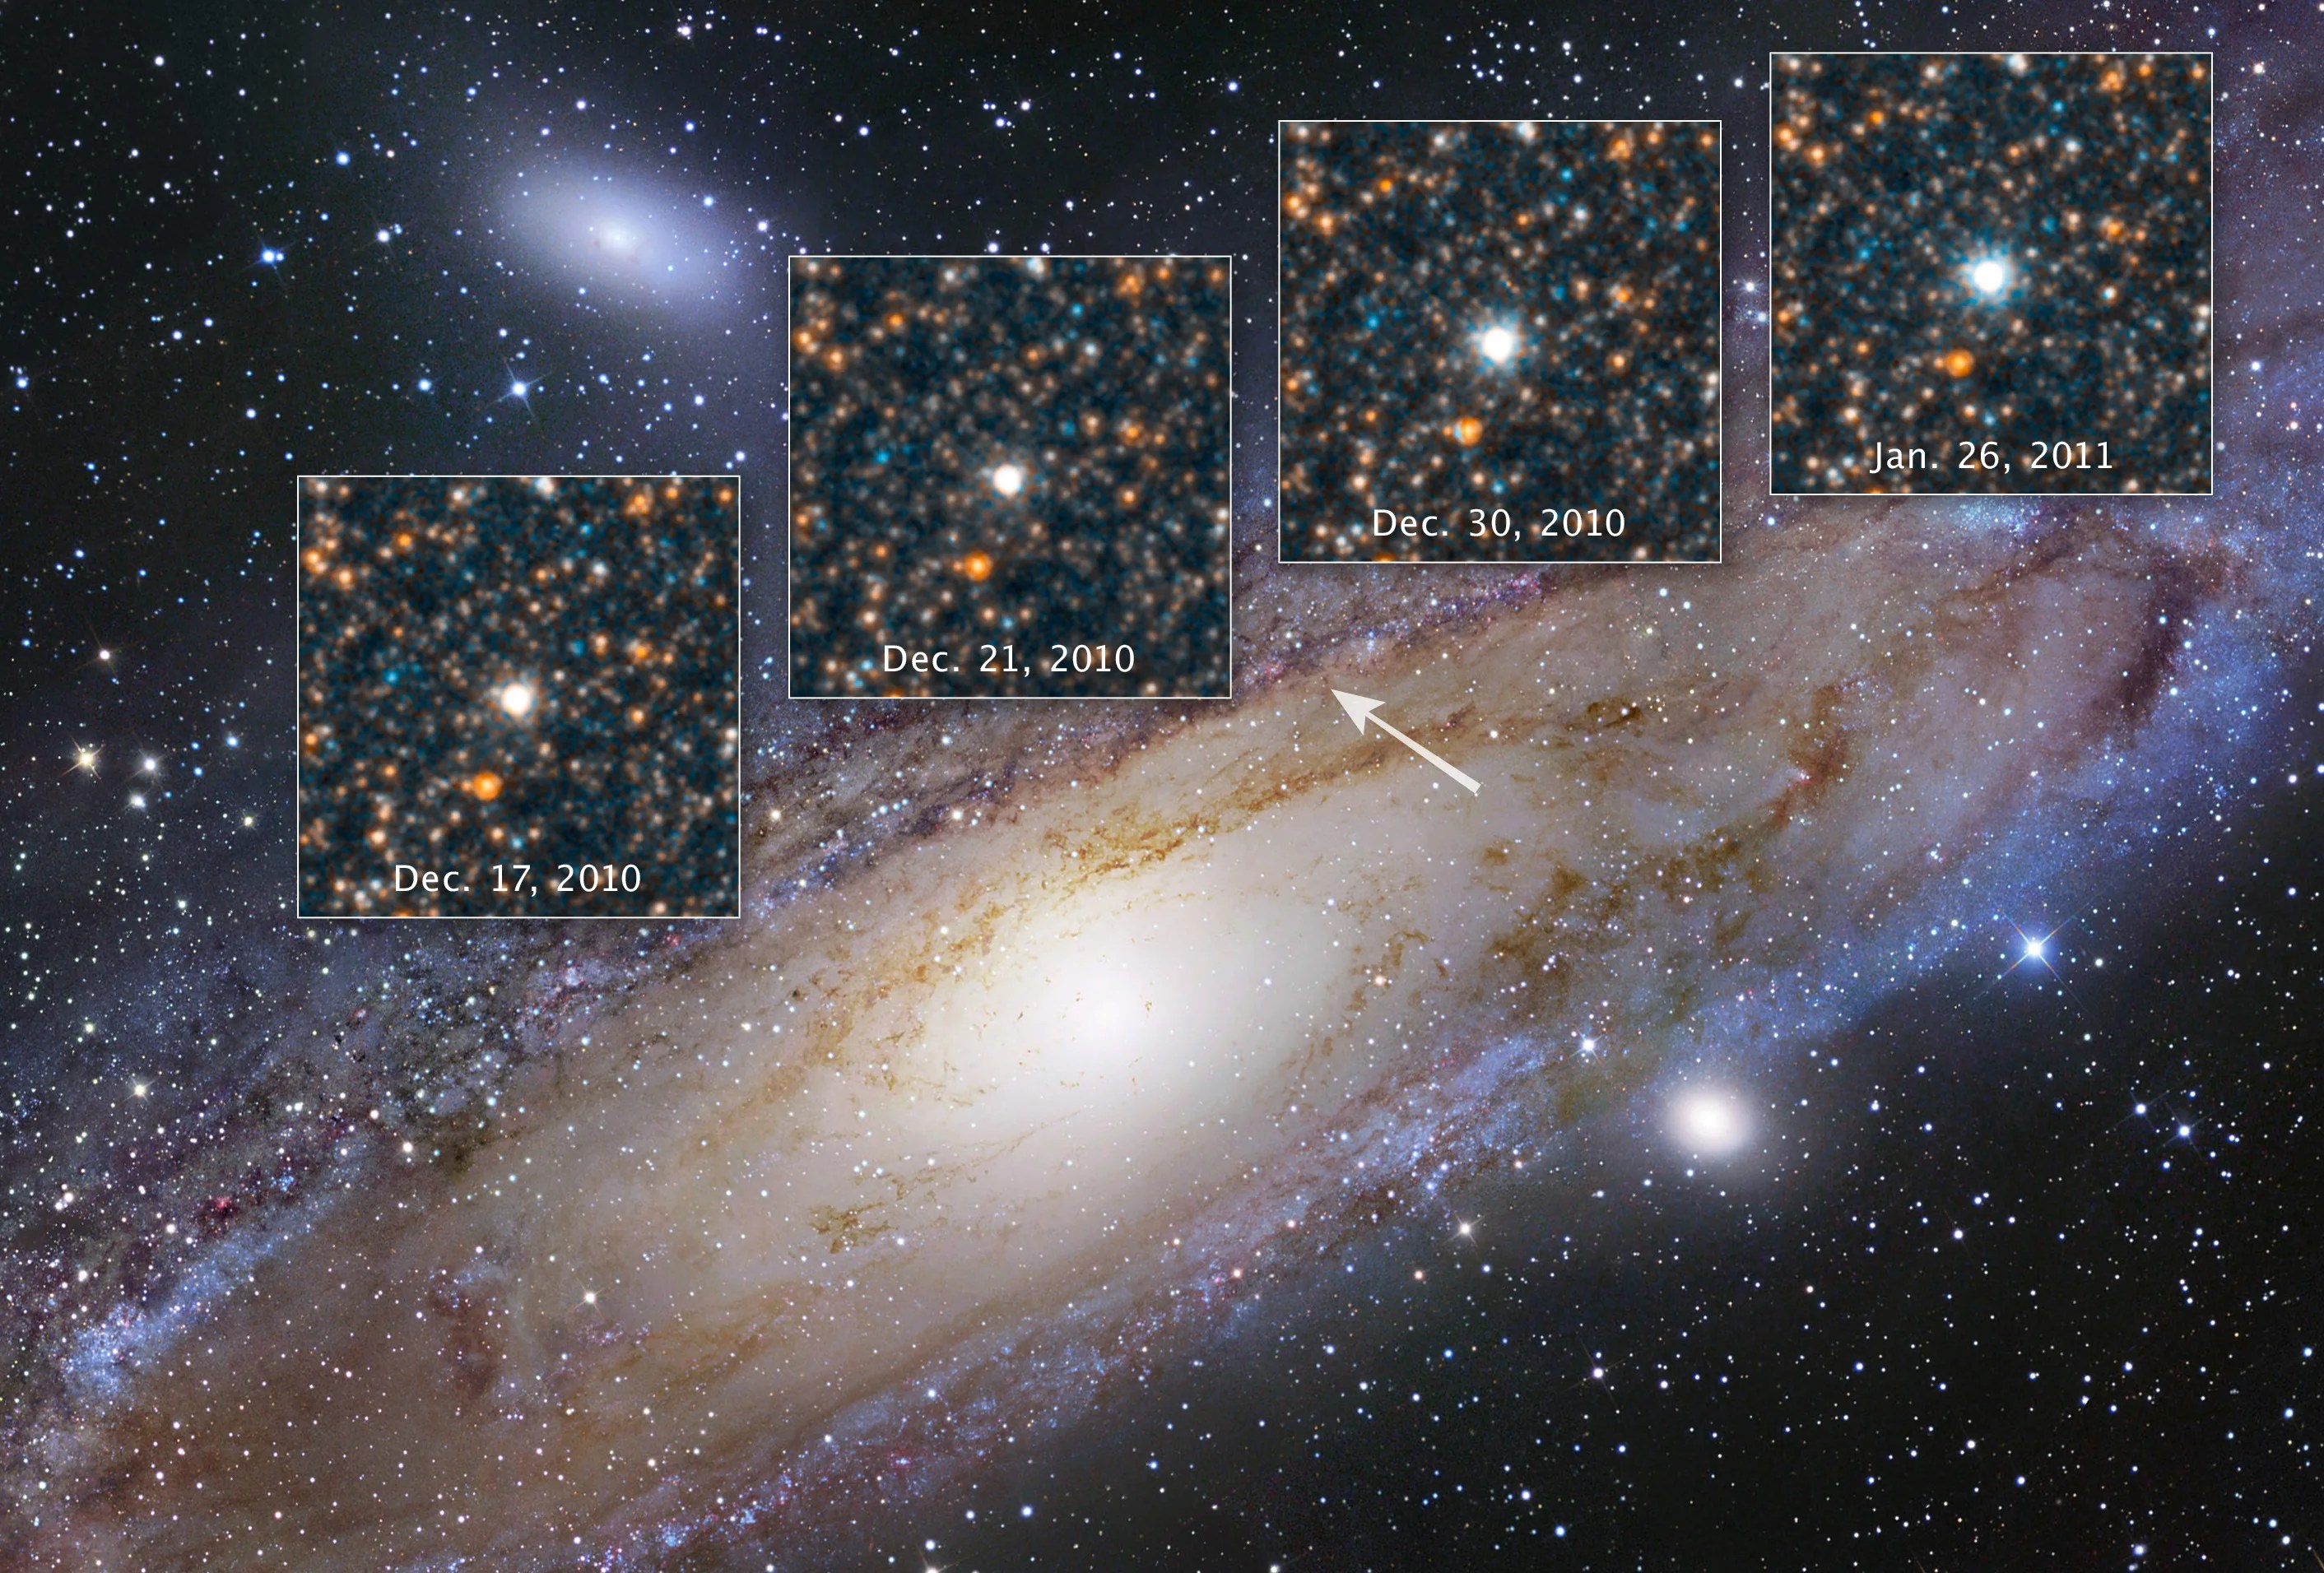 Ground-based image of the Andromeda Galaxy stretches from lower left to upper right. A white arrow points to the location of the Hubble observations. Above the galaxy are four boxes containing Hubble images of the variable star at different luminosities.